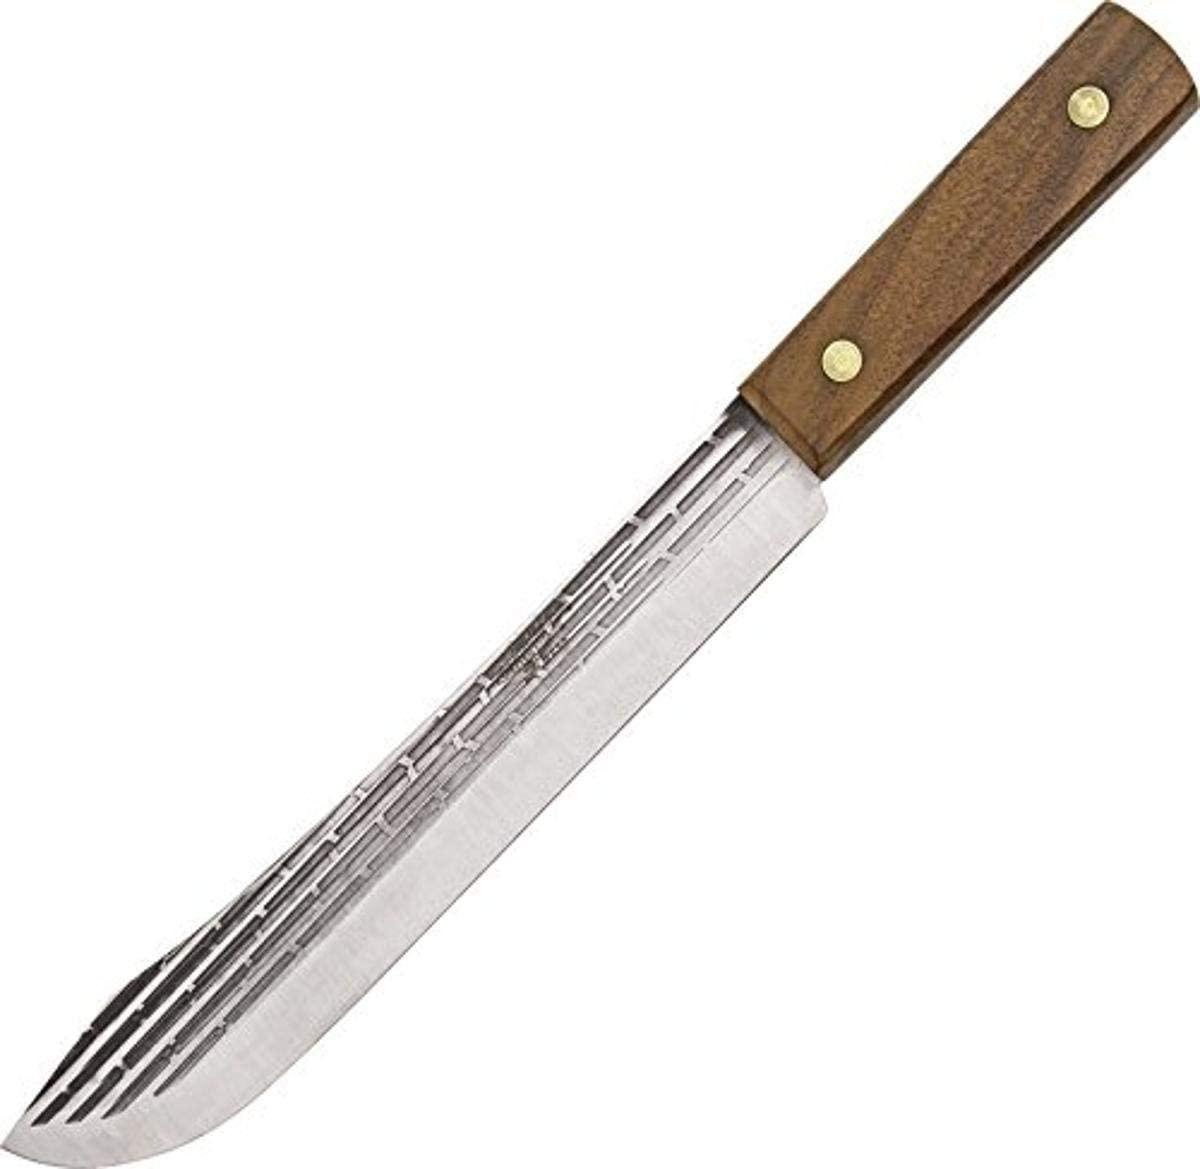 Ontario Knife Old Hickory Butcher Knife for $17.16